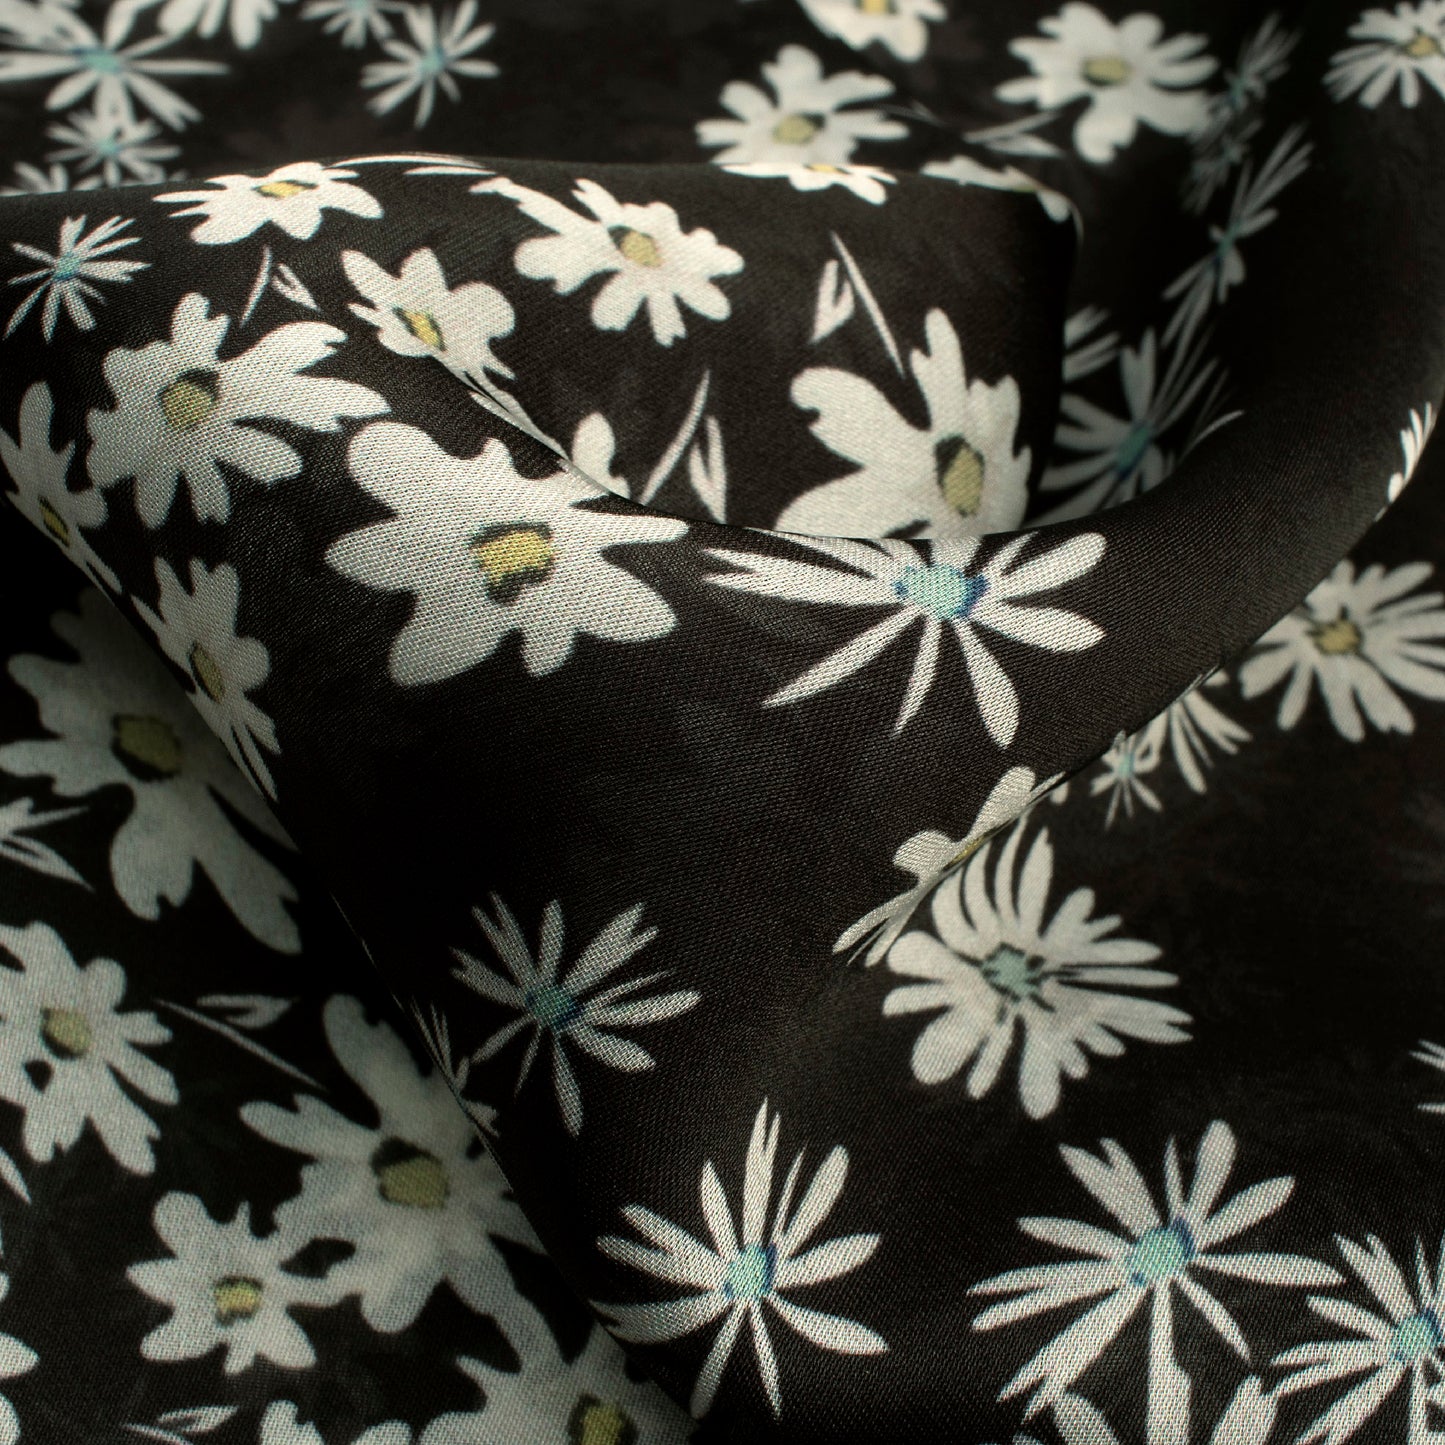 Black And White Floral Digital Print Georgette Satin Fabric